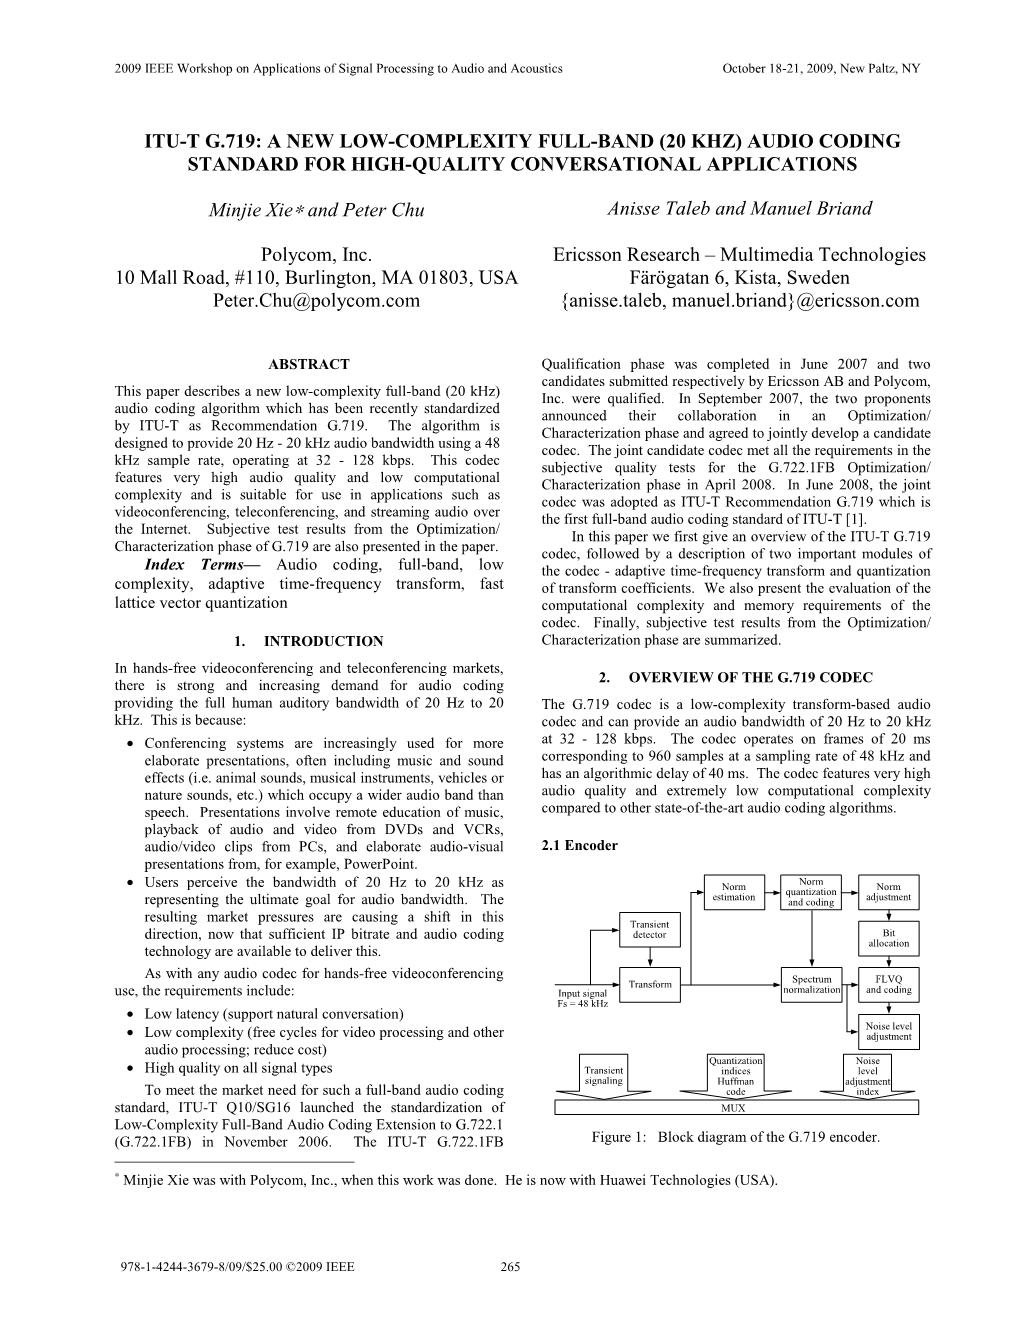 Itu-T G.719: a New Low-Complexity Full-Band (20 Khz) Audio Coding Standard for High-Quality Conversational Applications